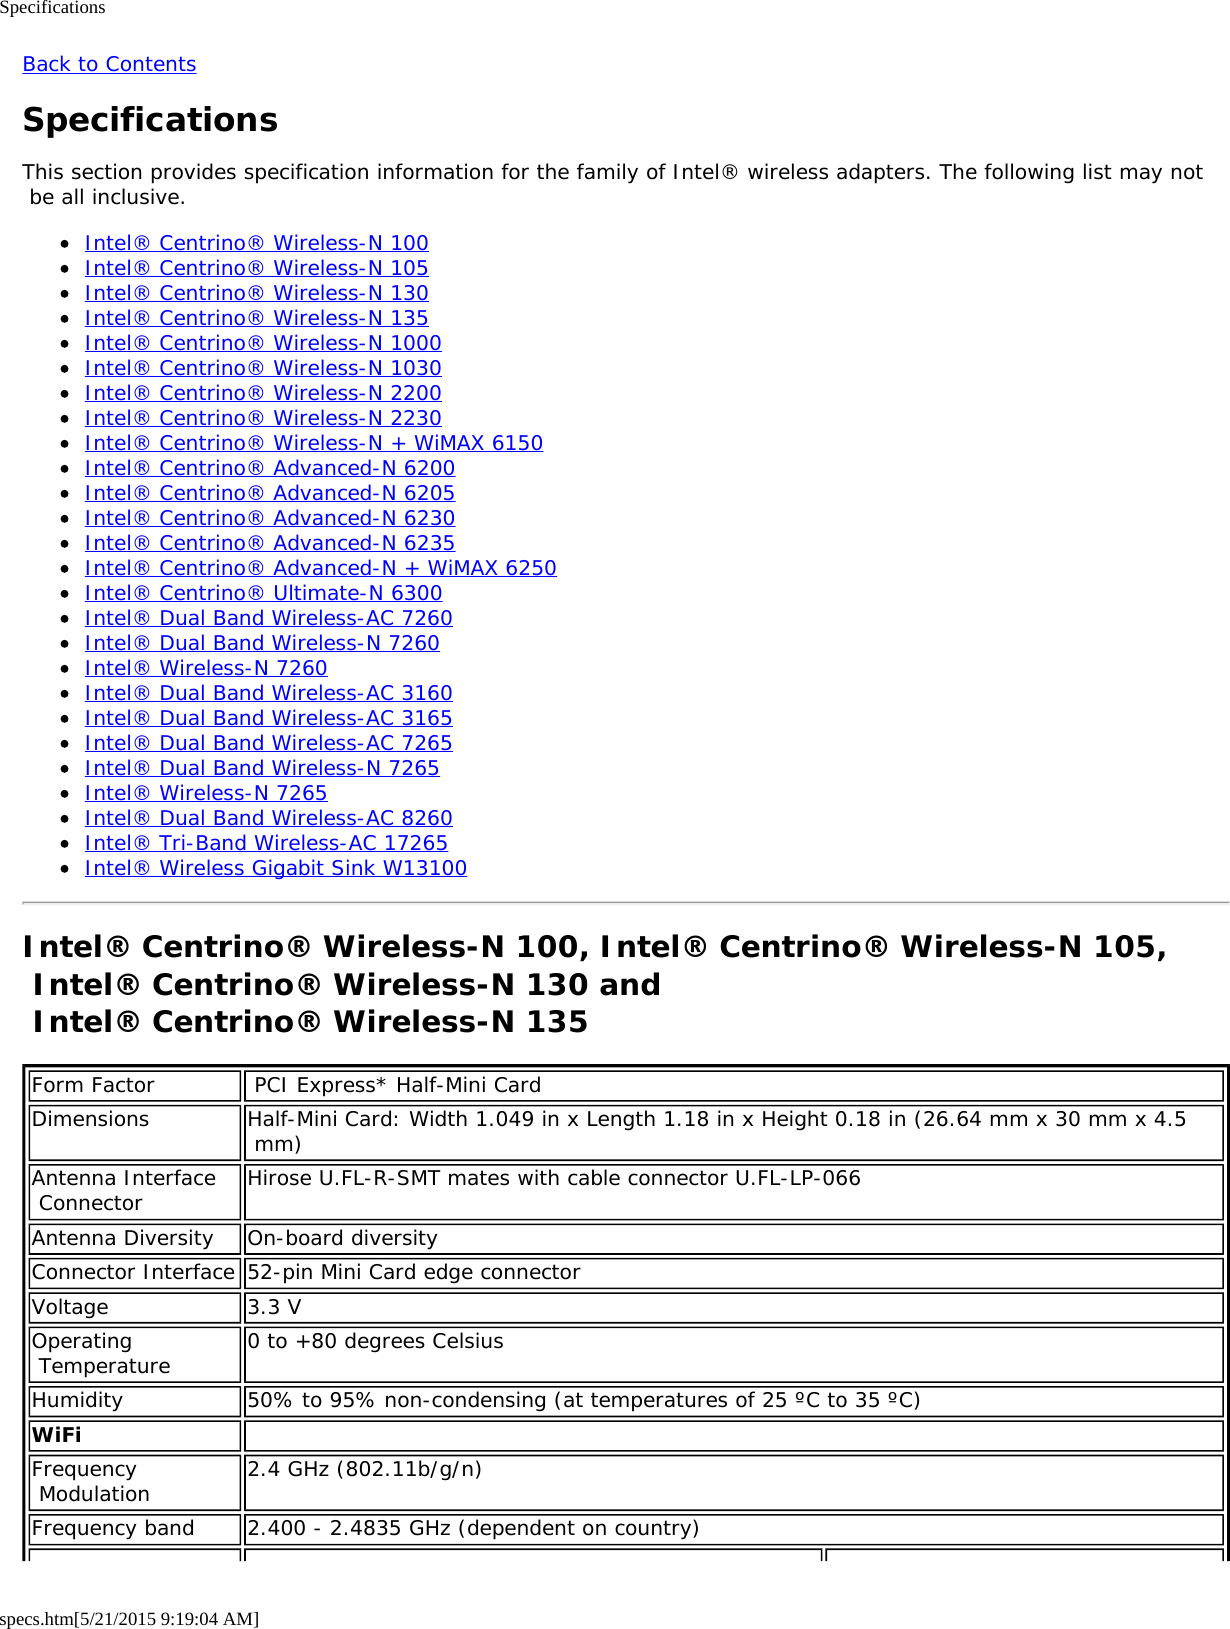 Specificationsspecs.htm[5/21/2015 9:19:04 AM]Back to ContentsSpecificationsThis section provides specification information for the family of Intel® wireless adapters. The following list may not be all inclusive.Intel® Centrino® Wireless-N 100Intel® Centrino® Wireless-N 105Intel® Centrino® Wireless-N 130Intel® Centrino® Wireless-N 135Intel® Centrino® Wireless-N 1000Intel® Centrino® Wireless-N 1030Intel® Centrino® Wireless-N 2200Intel® Centrino® Wireless-N 2230Intel® Centrino® Wireless-N + WiMAX 6150Intel® Centrino® Advanced-N 6200Intel® Centrino® Advanced-N 6205Intel® Centrino® Advanced-N 6230Intel® Centrino® Advanced-N 6235Intel® Centrino® Advanced-N + WiMAX 6250Intel® Centrino® Ultimate-N 6300Intel® Dual Band Wireless-AC 7260Intel® Dual Band Wireless-N 7260Intel® Wireless-N 7260Intel® Dual Band Wireless-AC 3160Intel® Dual Band Wireless-AC 3165Intel® Dual Band Wireless-AC 7265Intel® Dual Band Wireless-N 7265Intel® Wireless-N 7265Intel® Dual Band Wireless-AC 8260Intel® Tri-Band Wireless-AC 17265Intel® Wireless Gigabit Sink W13100Intel® Centrino® Wireless-N 100, Intel® Centrino® Wireless-N 105, Intel® Centrino® Wireless-N 130 and  Intel® Centrino® Wireless-N 135Form Factor  PCI Express* Half-Mini CardDimensions Half-Mini Card: Width 1.049 in x Length 1.18 in x Height 0.18 in (26.64 mm x 30 mm x 4.5 mm)Antenna Interface Connector Hirose U.FL-R-SMT mates with cable connector U.FL-LP-066Antenna Diversity On-board diversityConnector Interface 52-pin Mini Card edge connectorVoltage 3.3 VOperating Temperature 0 to +80 degrees CelsiusHumidity 50% to 95% non-condensing (at temperatures of 25 ºC to 35 ºC)WiFi  Frequency Modulation 2.4 GHz (802.11b/g/n)Frequency band 2.400 - 2.4835 GHz (dependent on country)